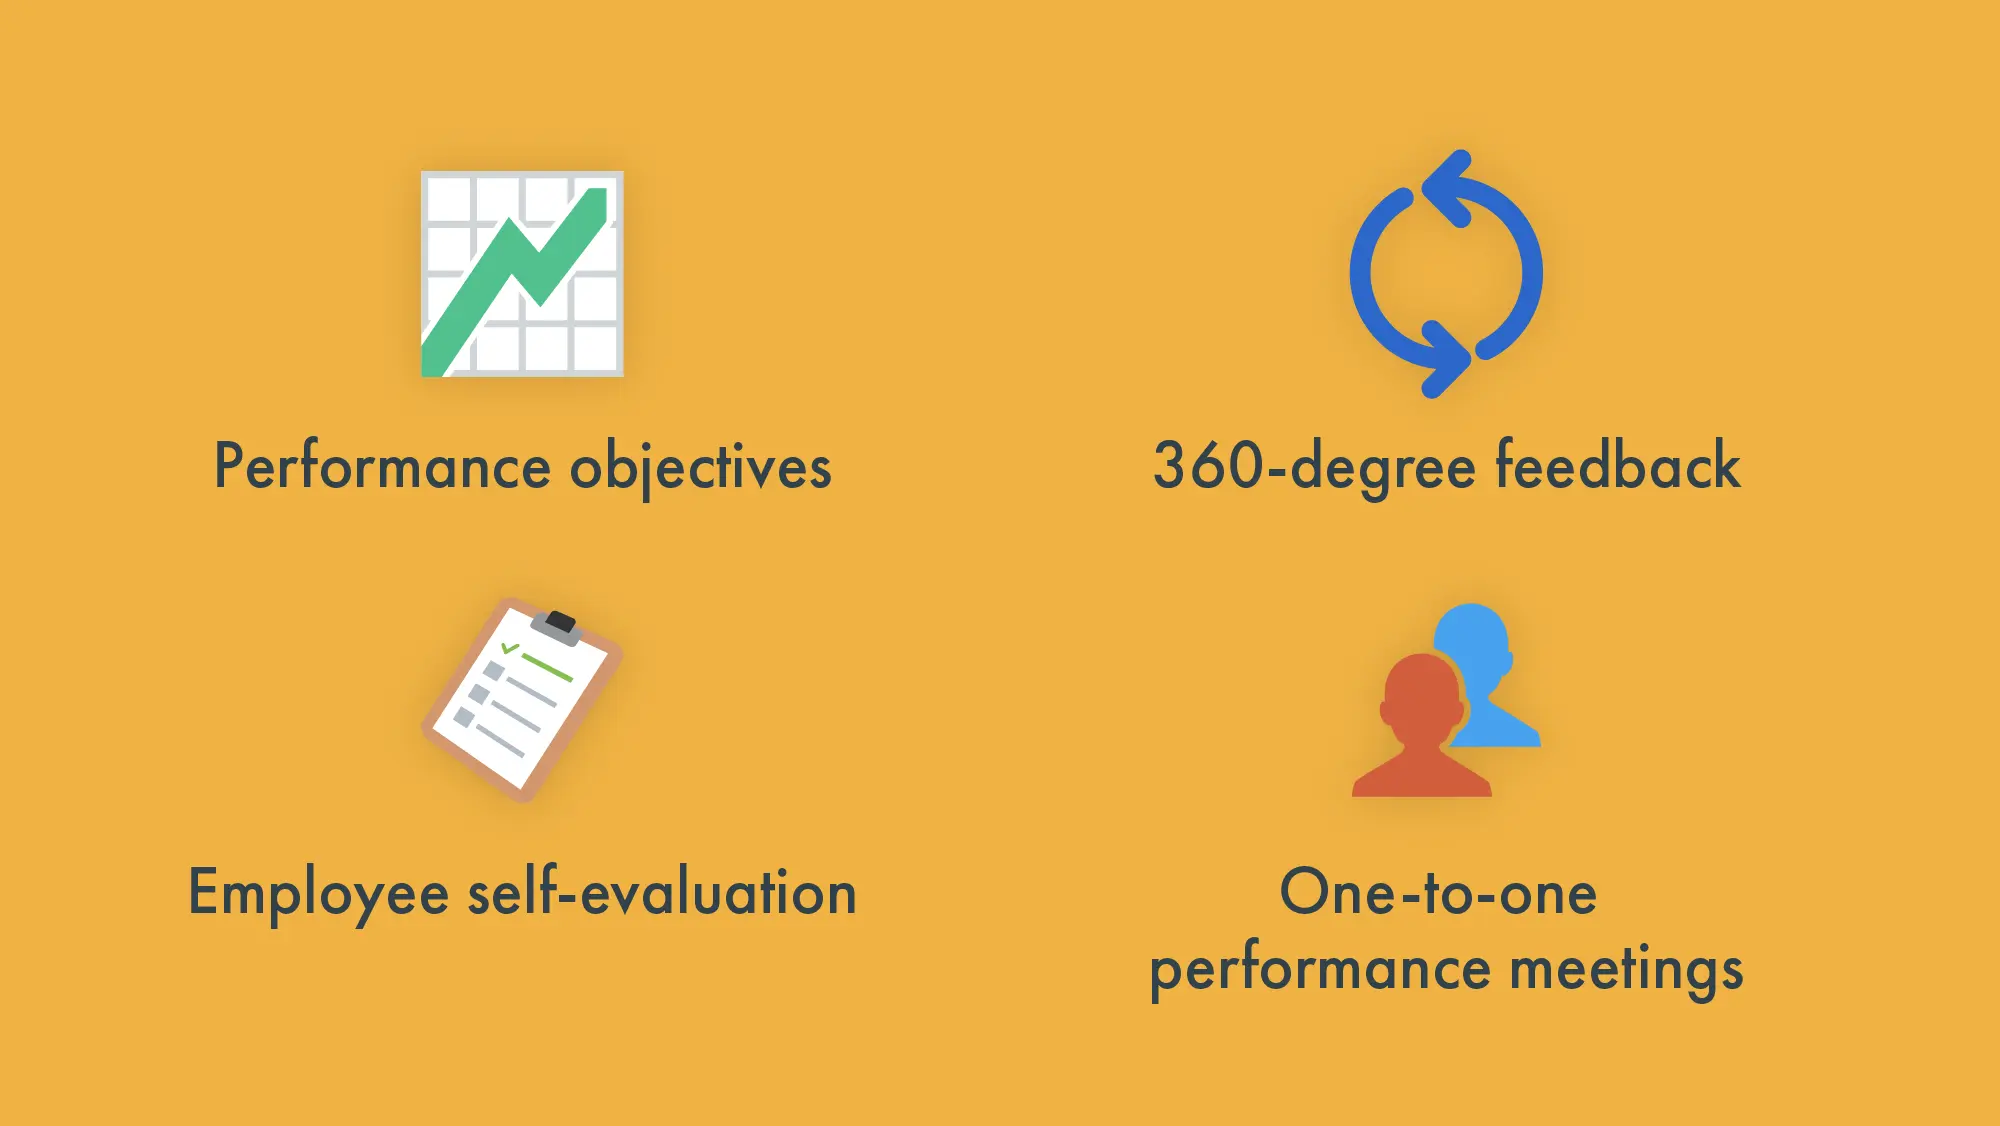 4 key elements of performance reviews: clear objectives, 360 feedback, employee self-evaluation and 1-1 meetings